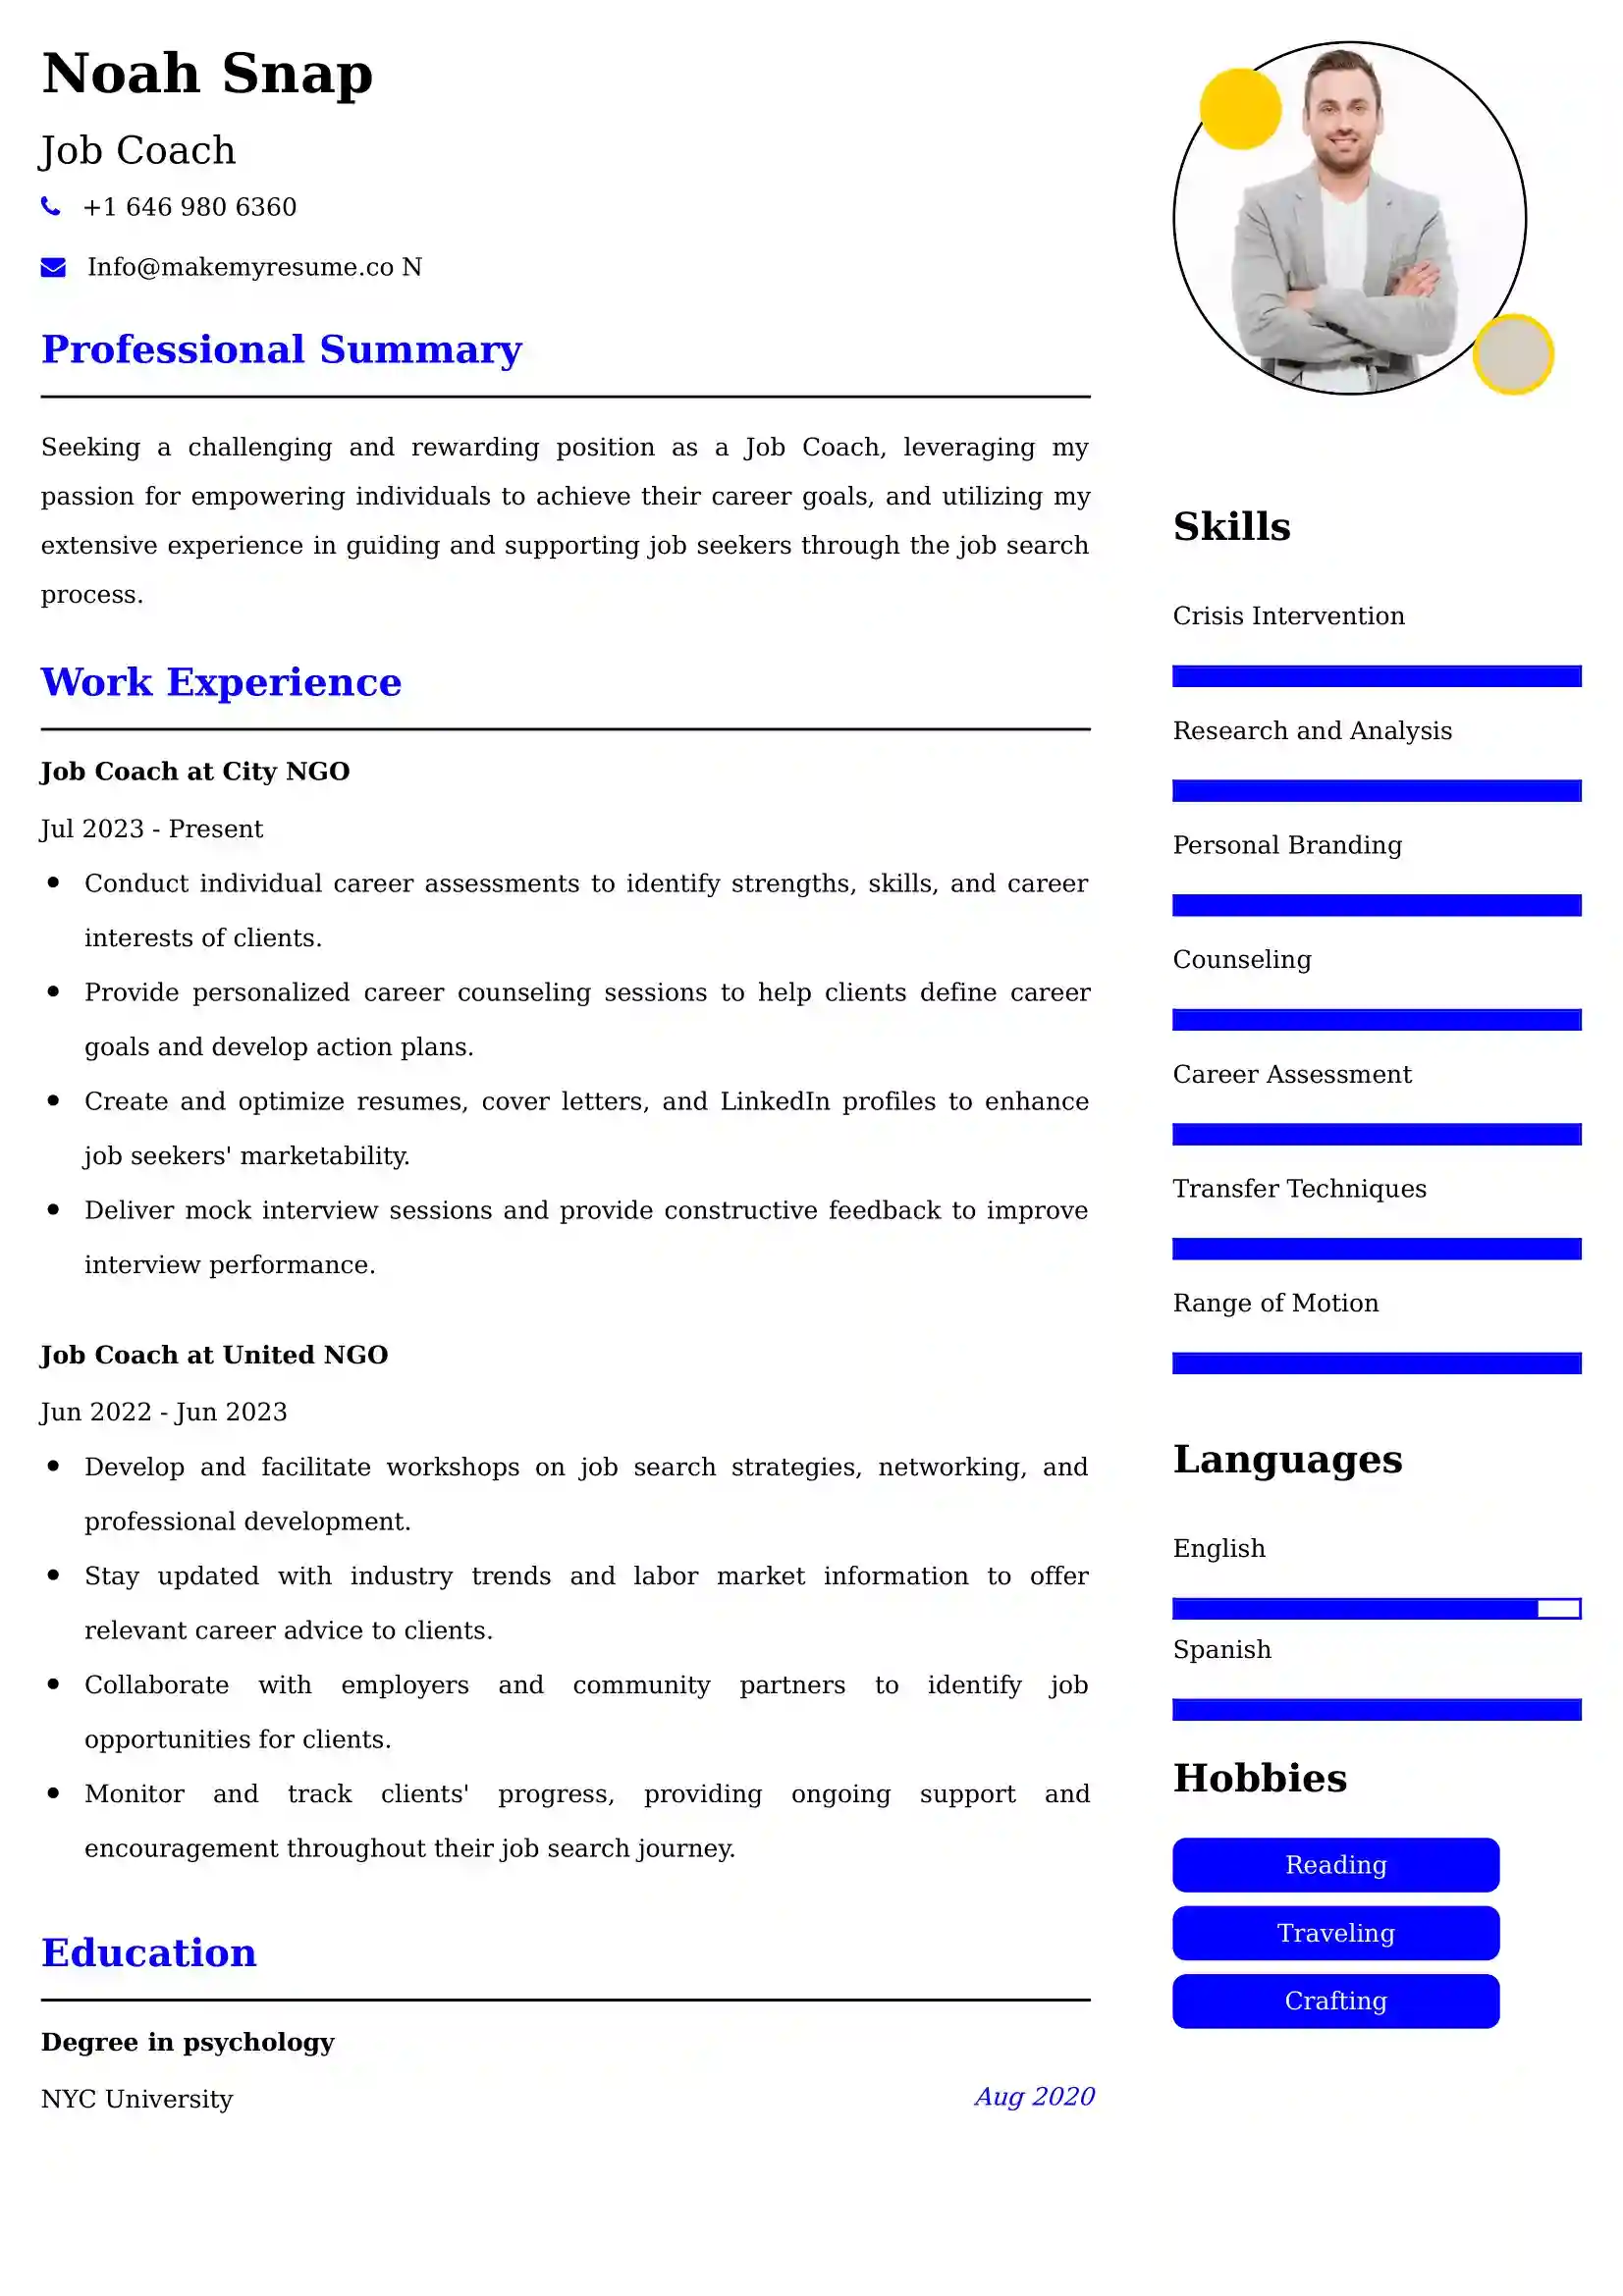 Job Coach Resume Examples for UK Jobs - Tips and Guide